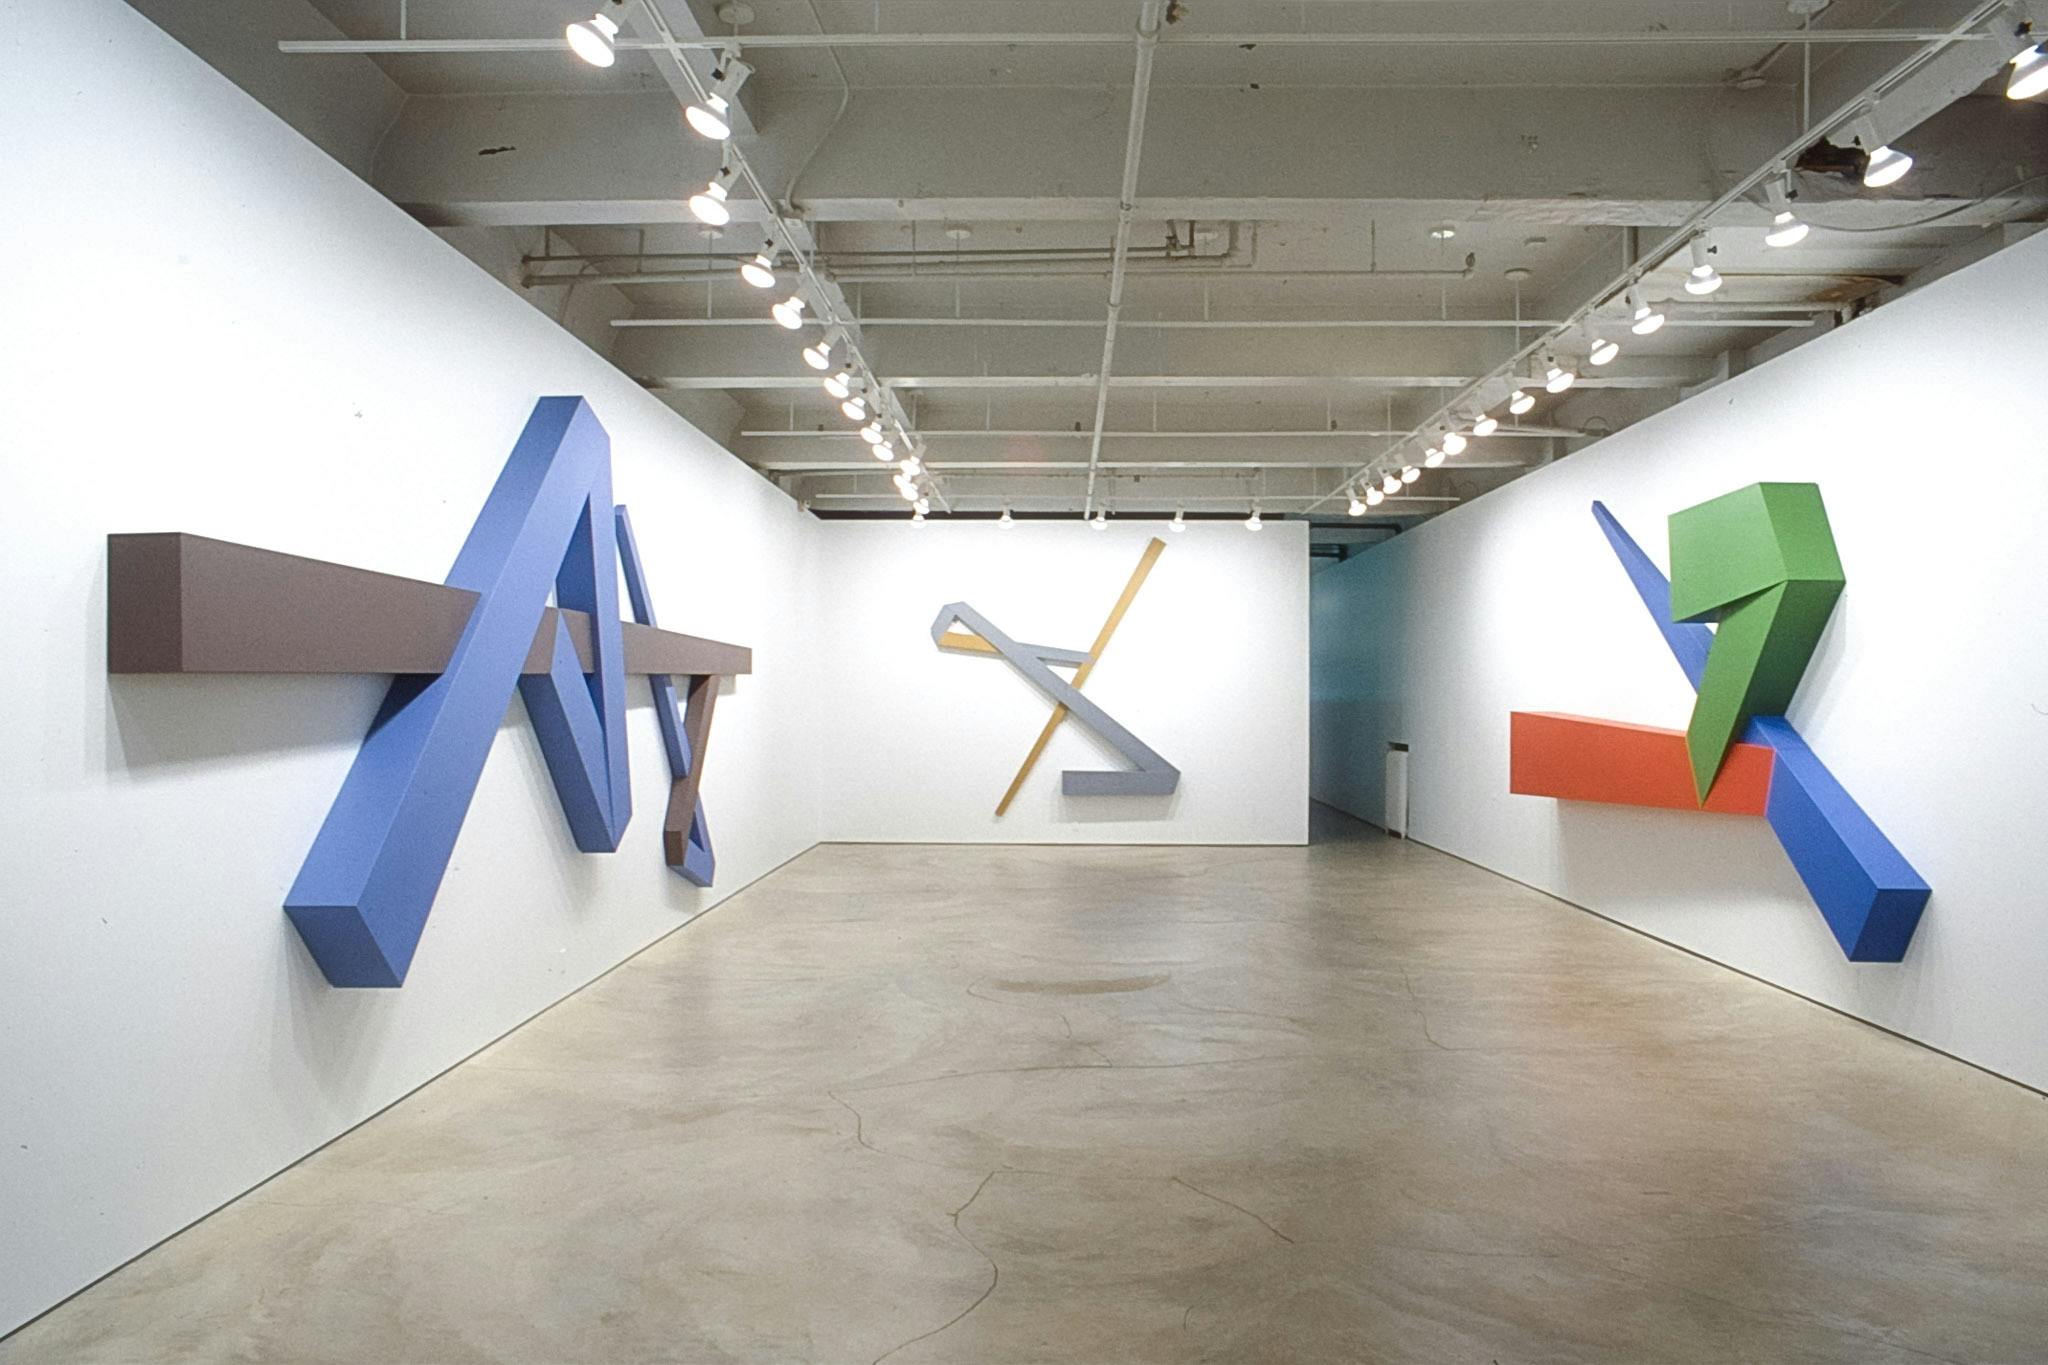 Three large-sized geometric sculptures are mounted on the gallery walls. The one on the left resembles a capital letter A in blue, and the middle one resembles a flipped over character Z in grey. 